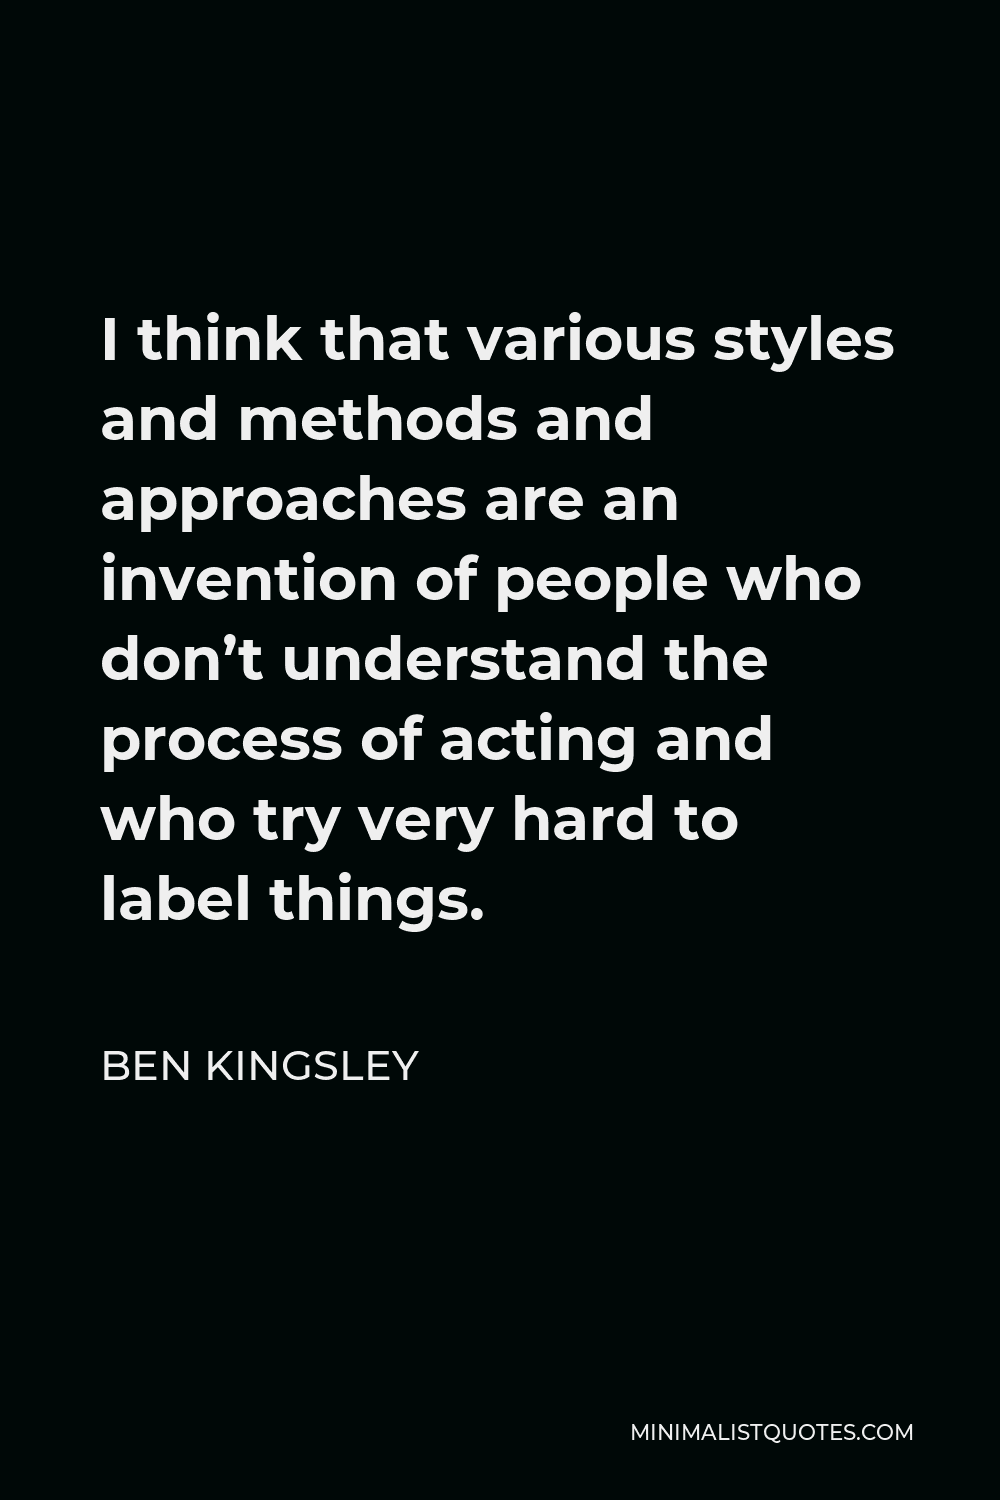 Ben Kingsley Quote - I think that various styles and methods and approaches are an invention of people who don’t understand the process of acting and who try very hard to label things.